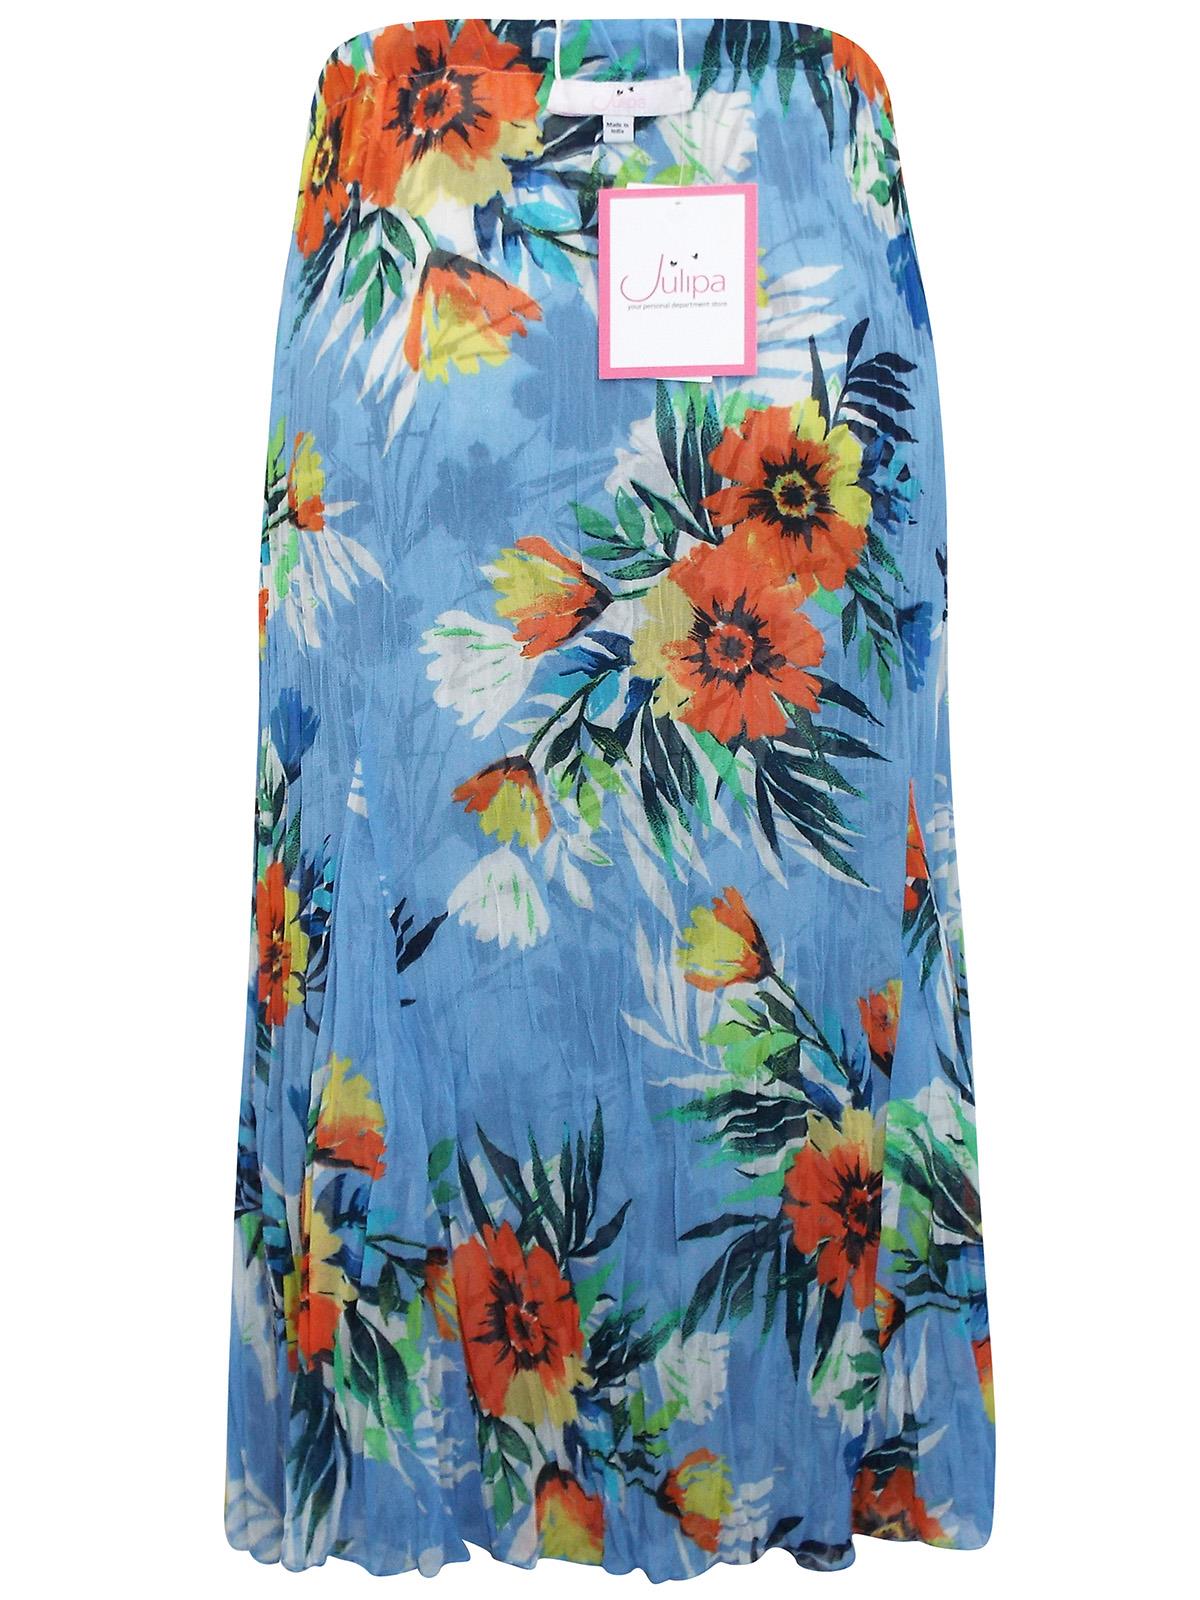 Julipa Reversible Crinkle Skirt Two-Way Summer Holiday Elastic Floral Brand New